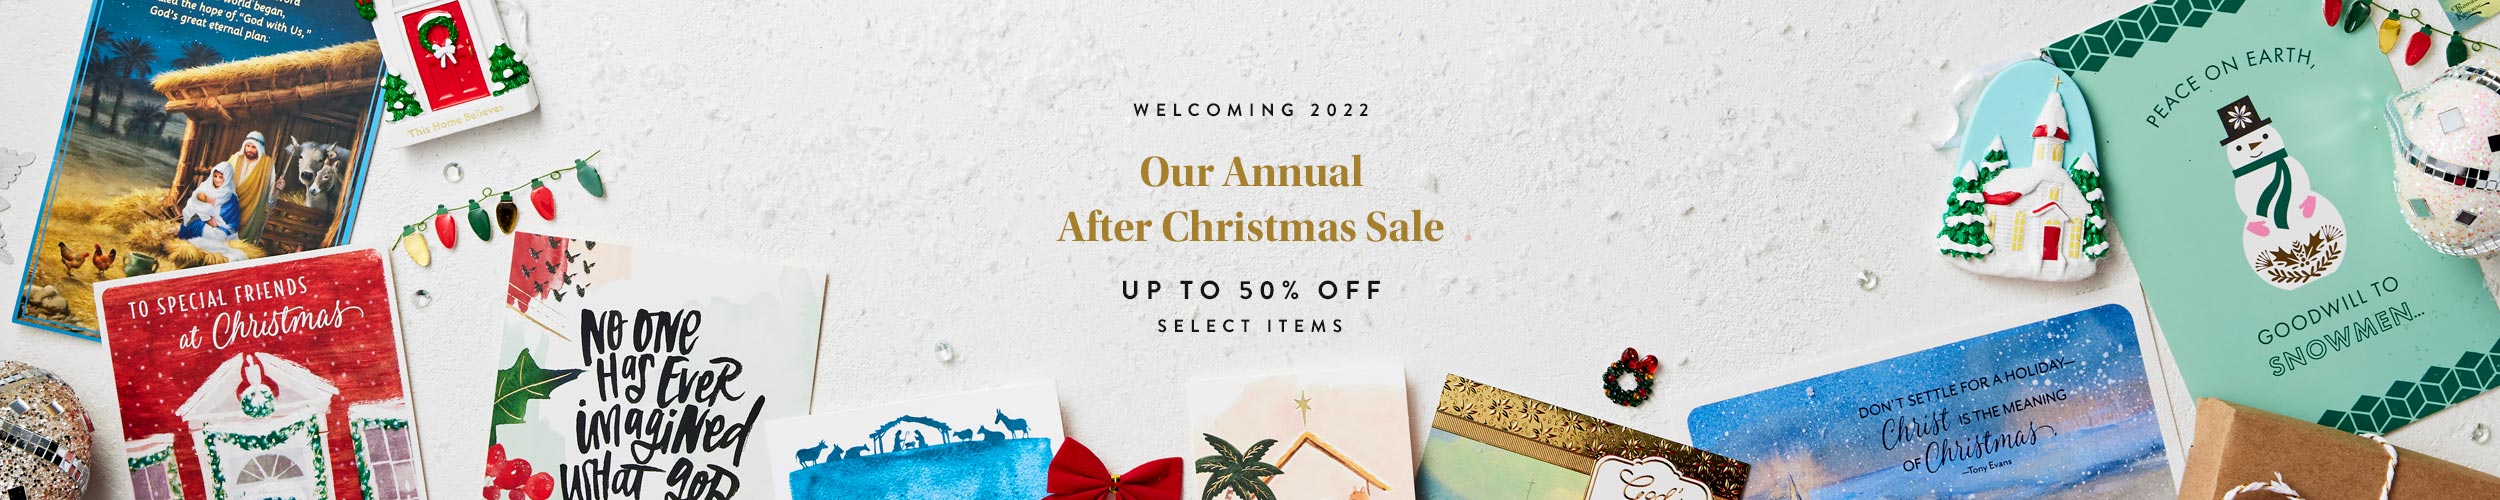 After Christmas Sale: Up to 50% Off Select Items